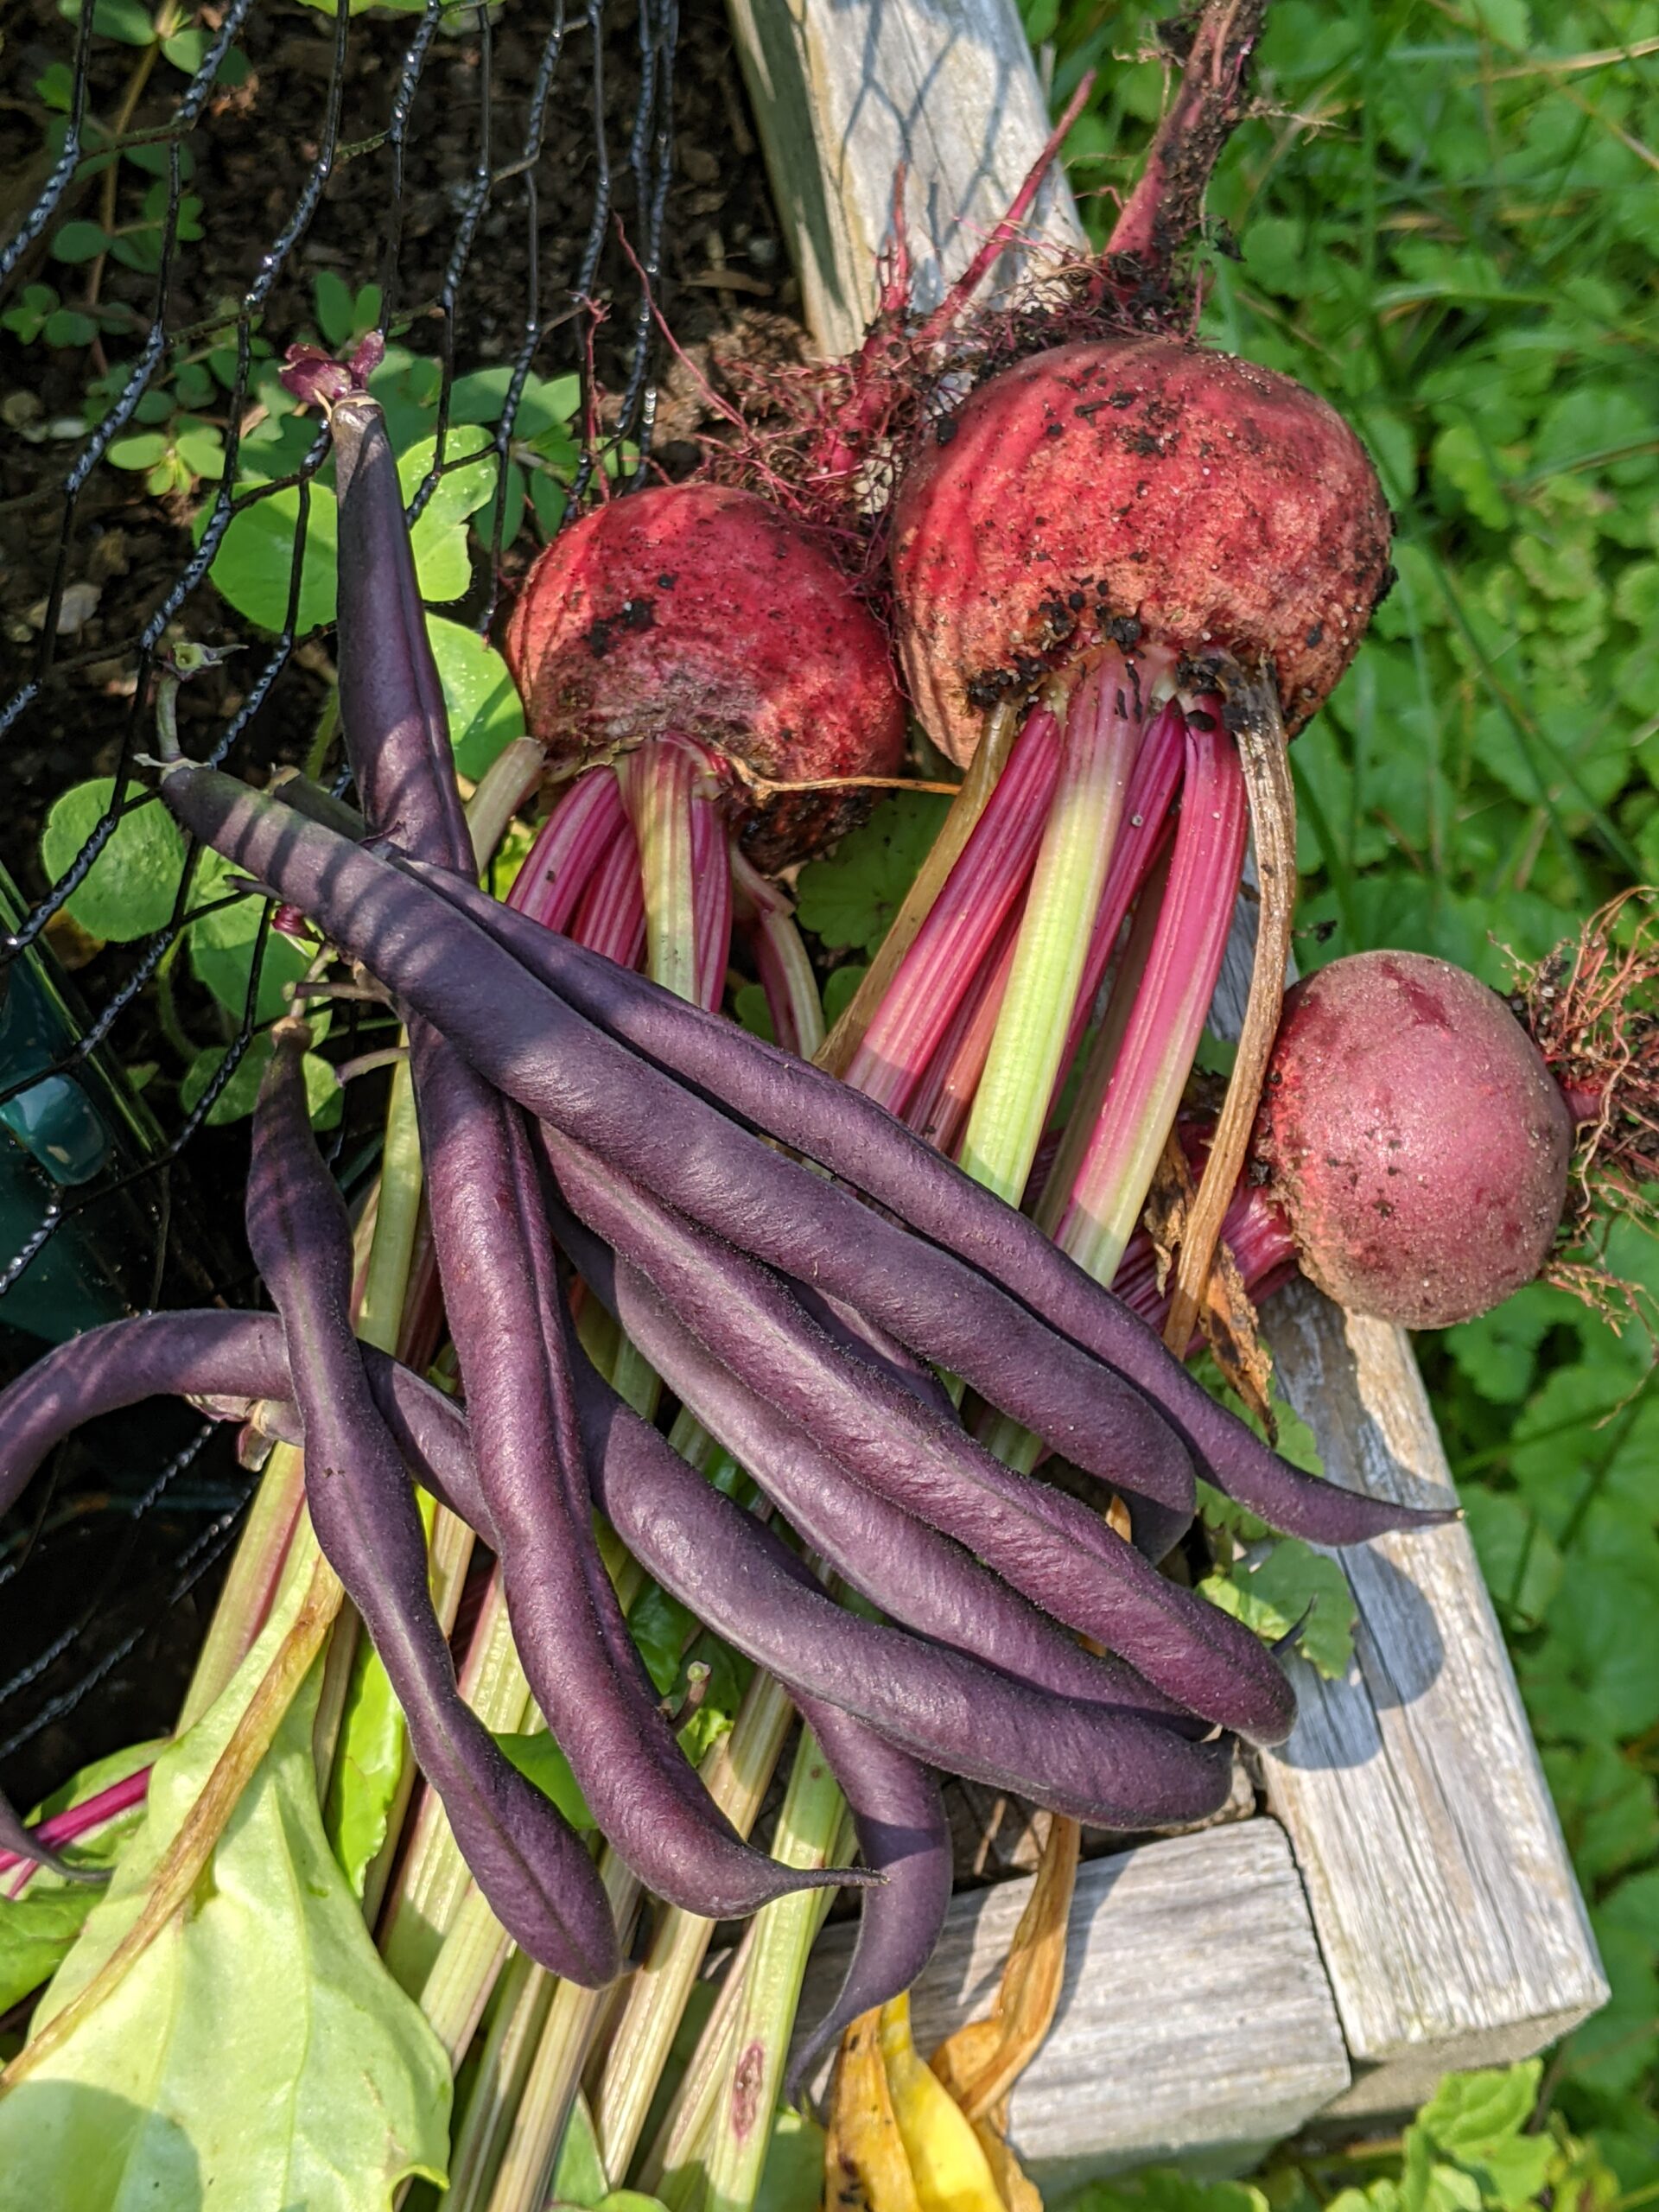 burgundy beans (purple in color)